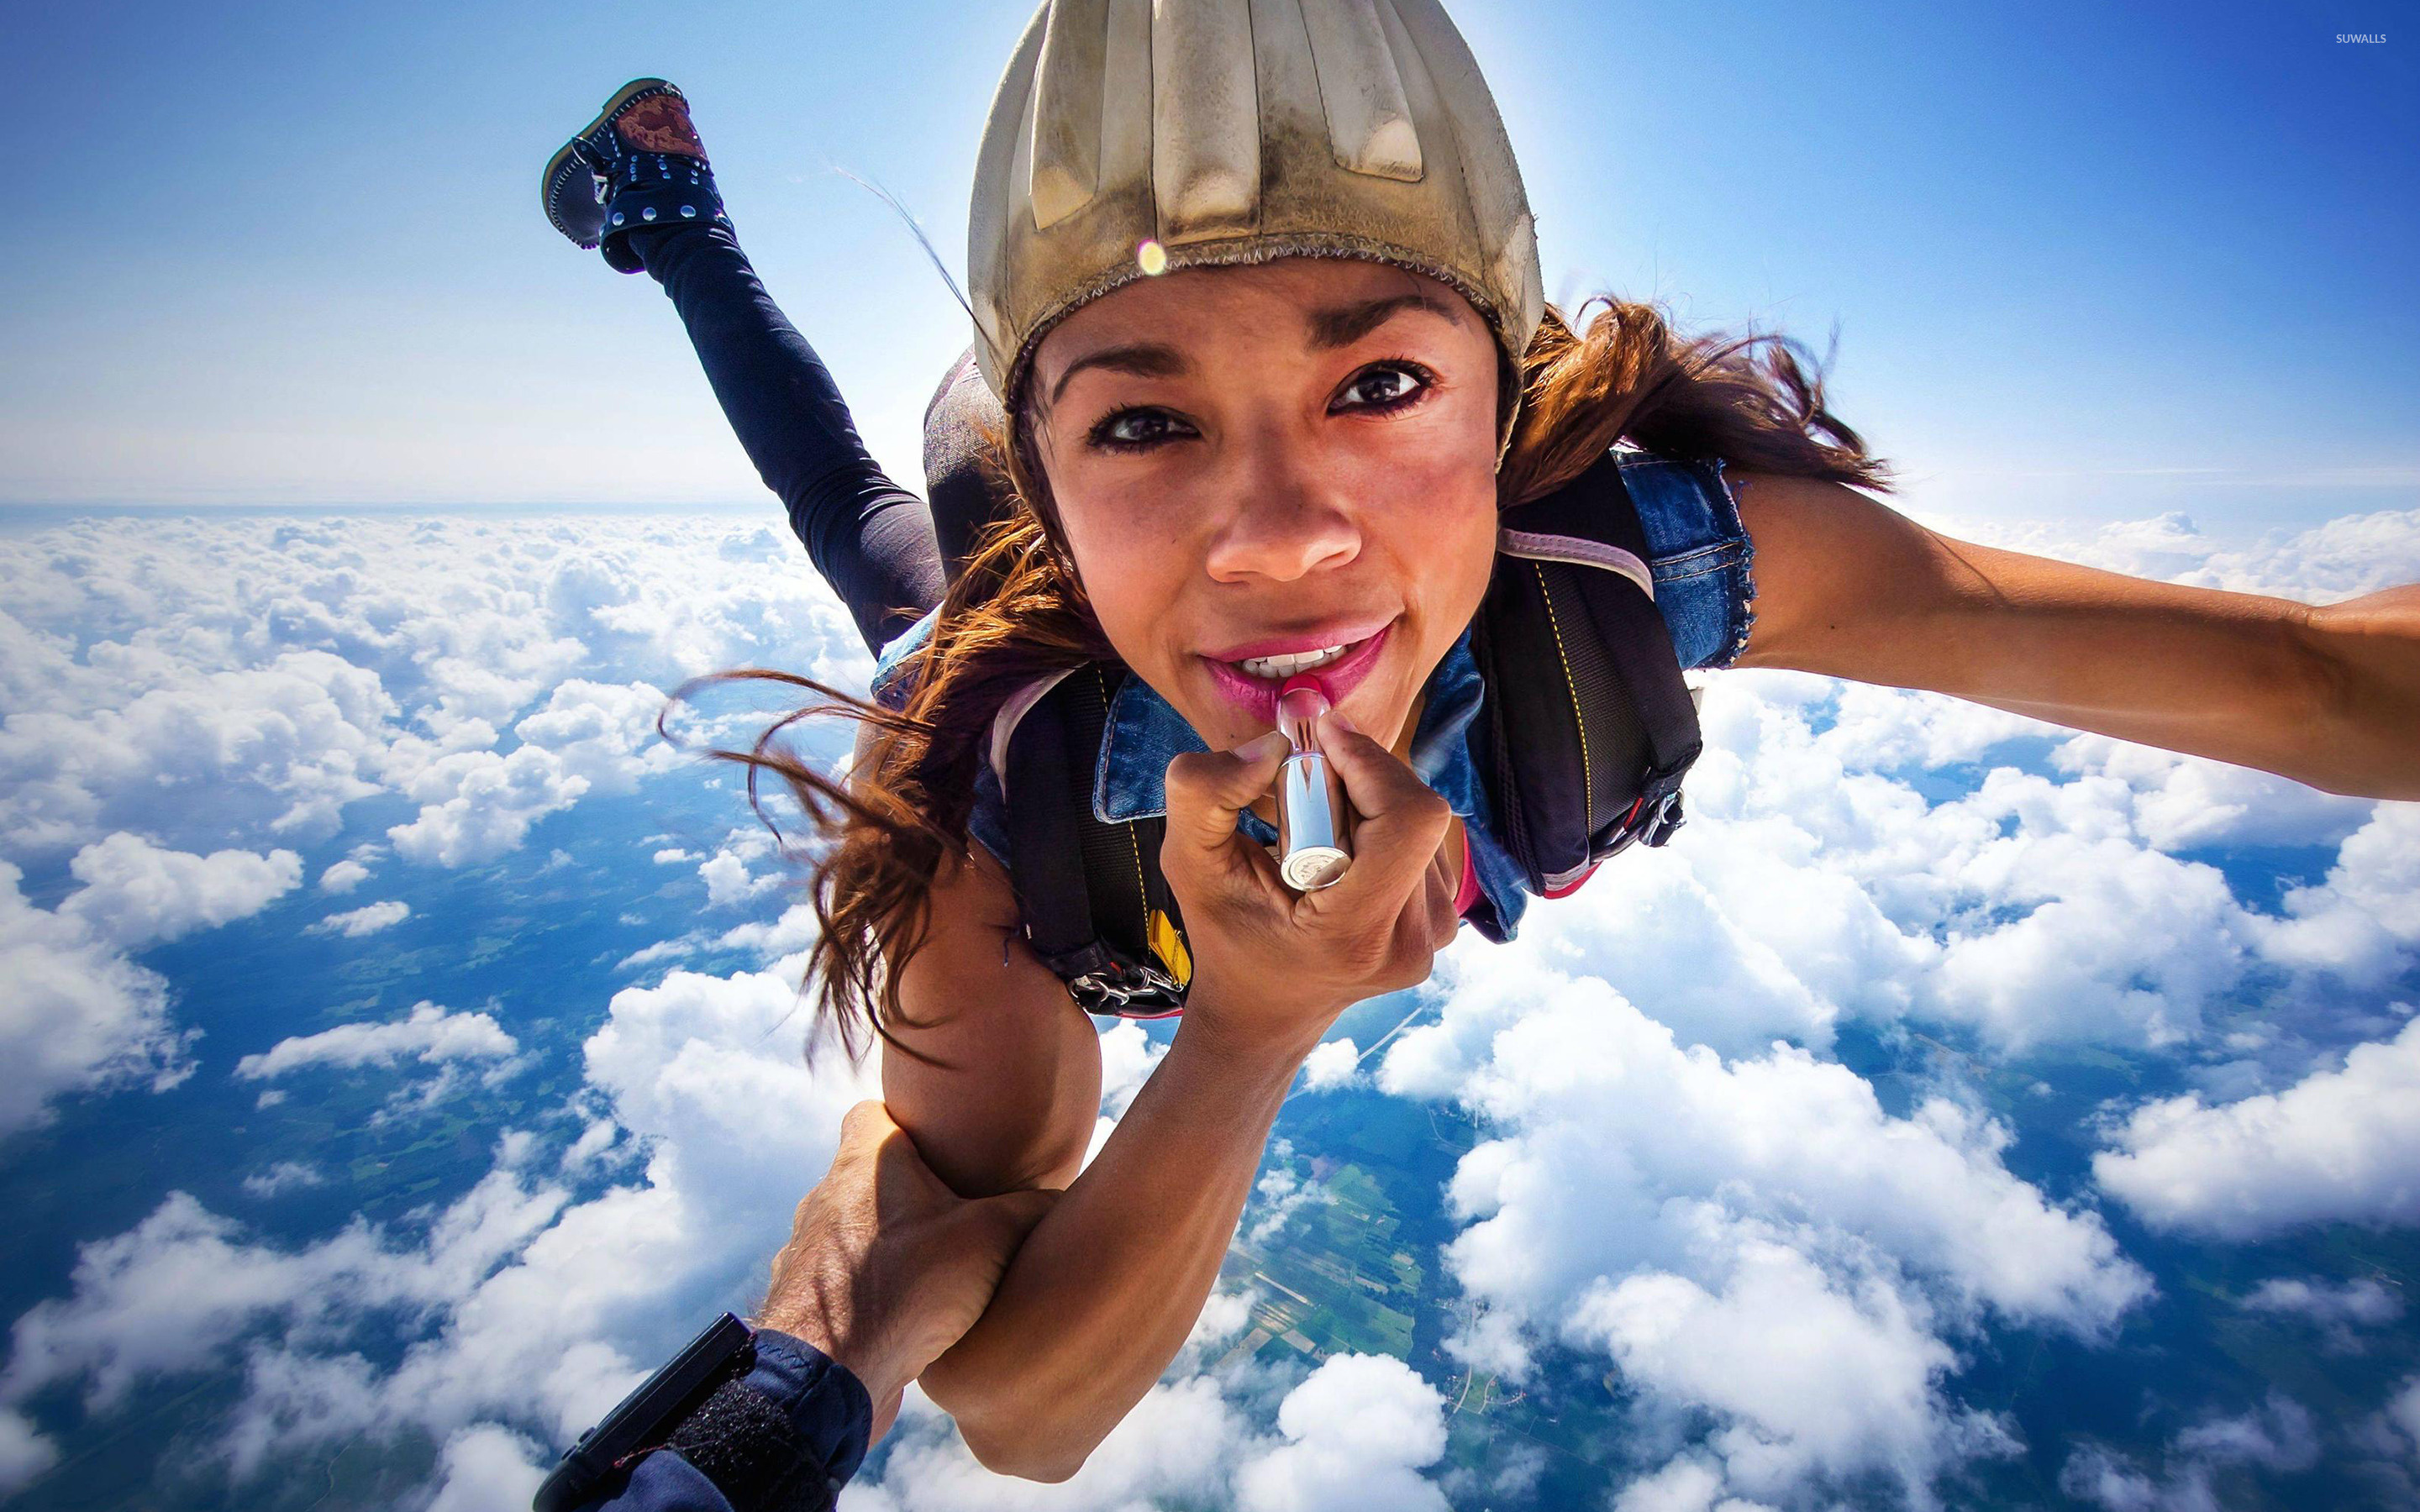 Parachuting: Skydiver girl with lipstick, Free-falling tandem formation. 2880x1800 HD Wallpaper.